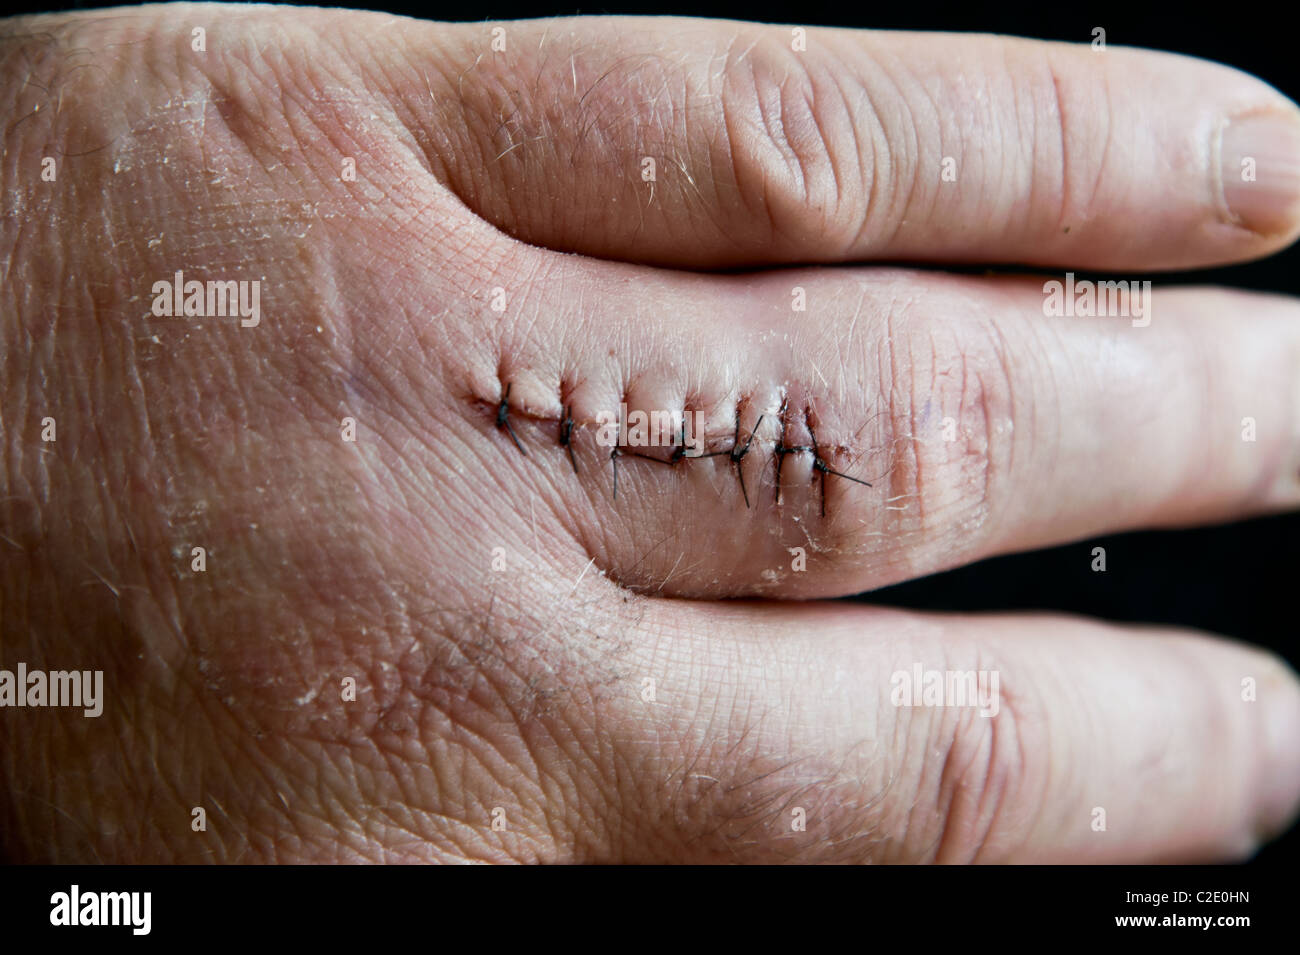 Seven non-dissolvable stitches (sutures) closing a surgical incision wound on a man's finger Stock Photo